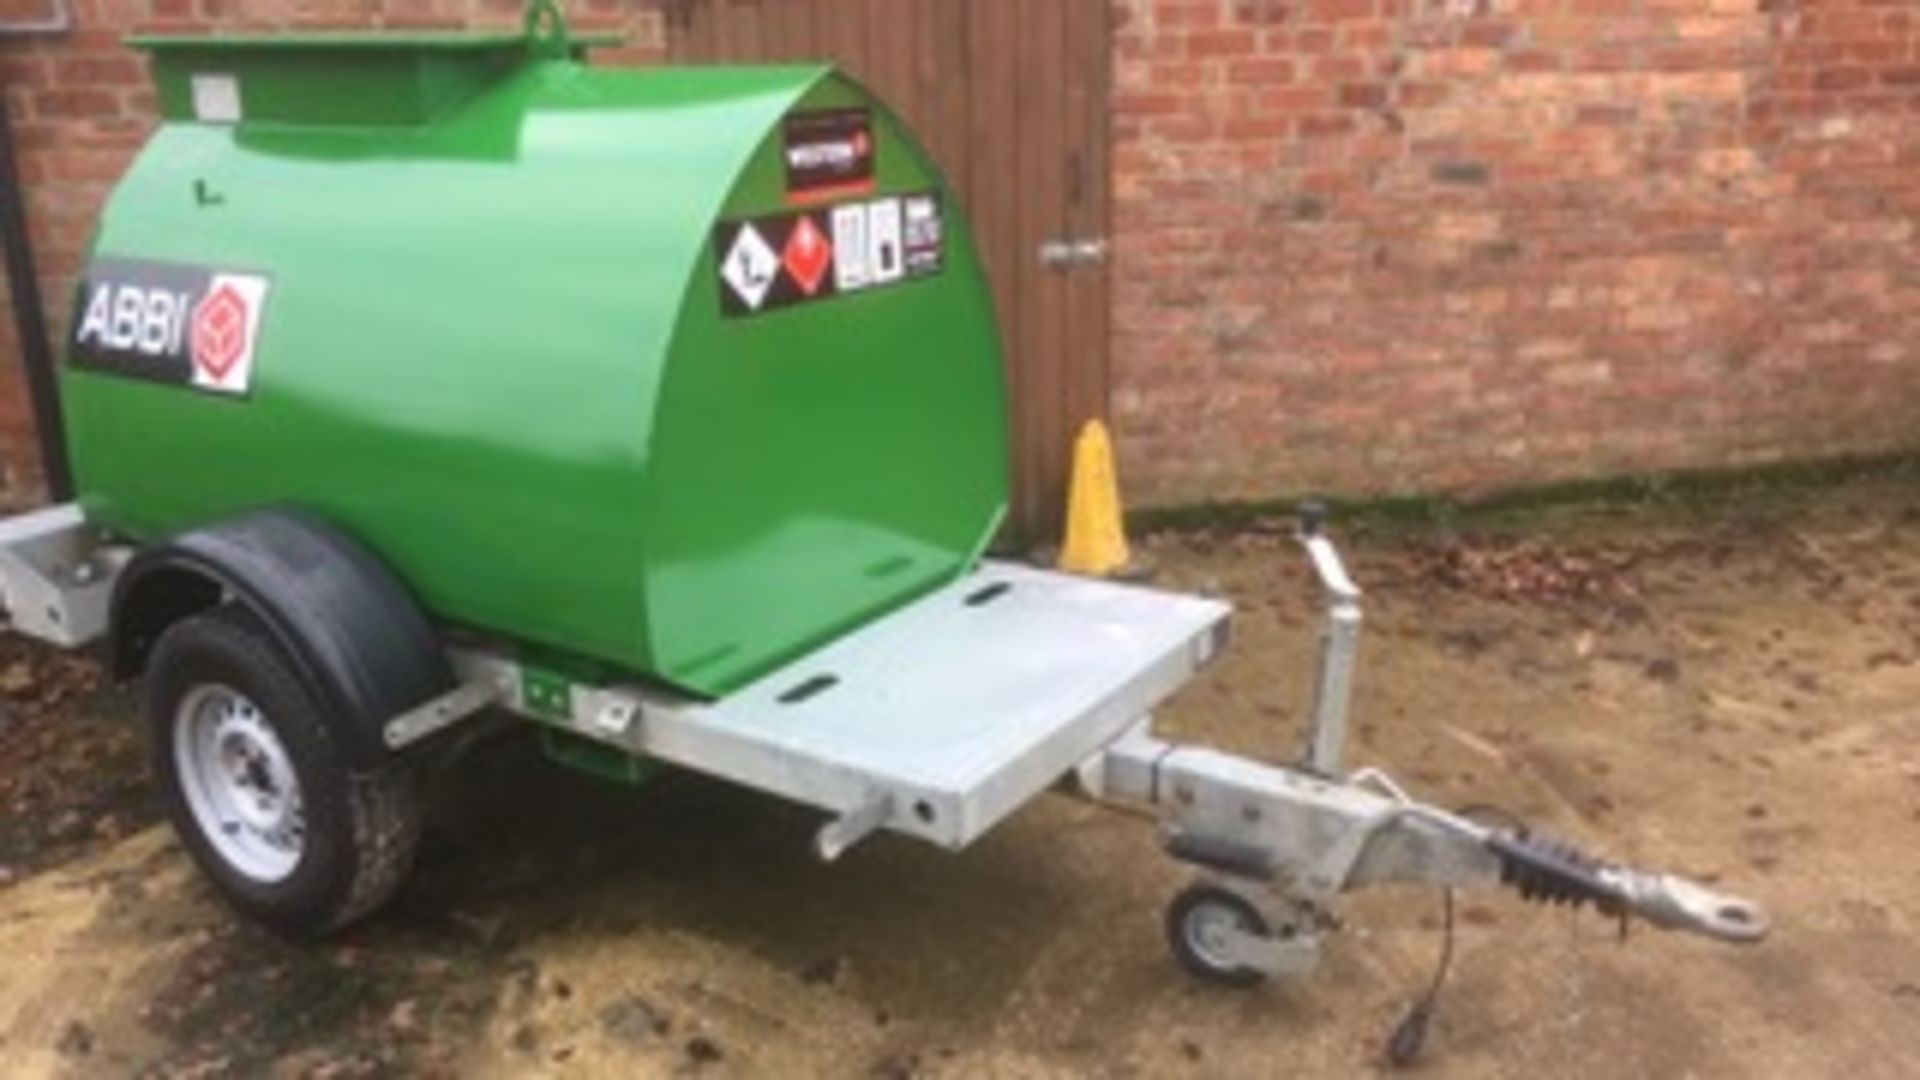 WESTERN ABBI 950 LITRE BOWSER WITH HAND PUMP